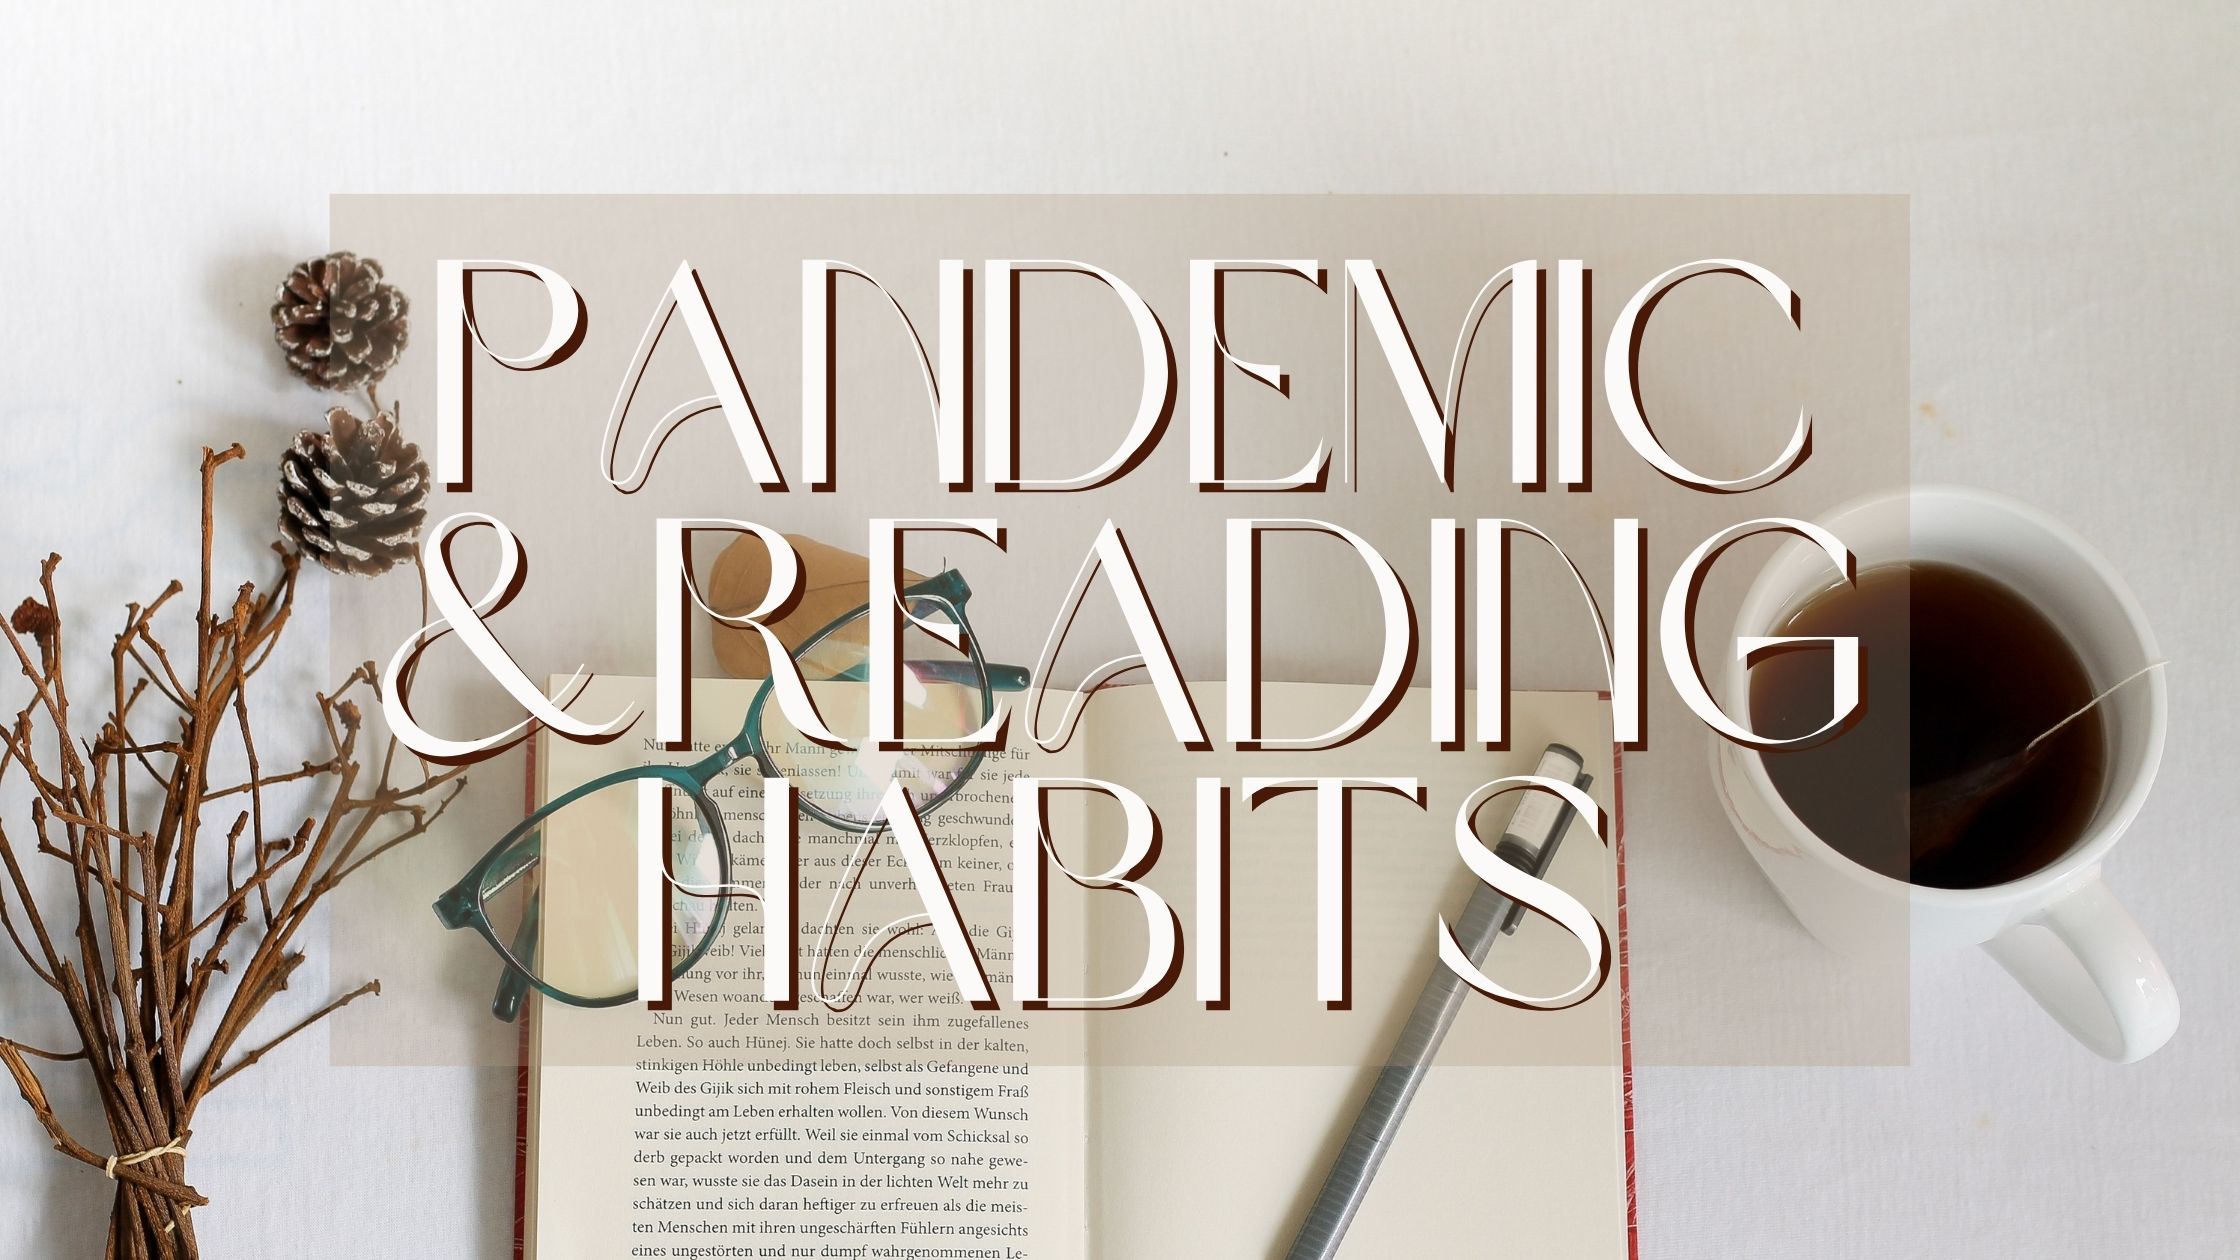 Pandemic and reading habits